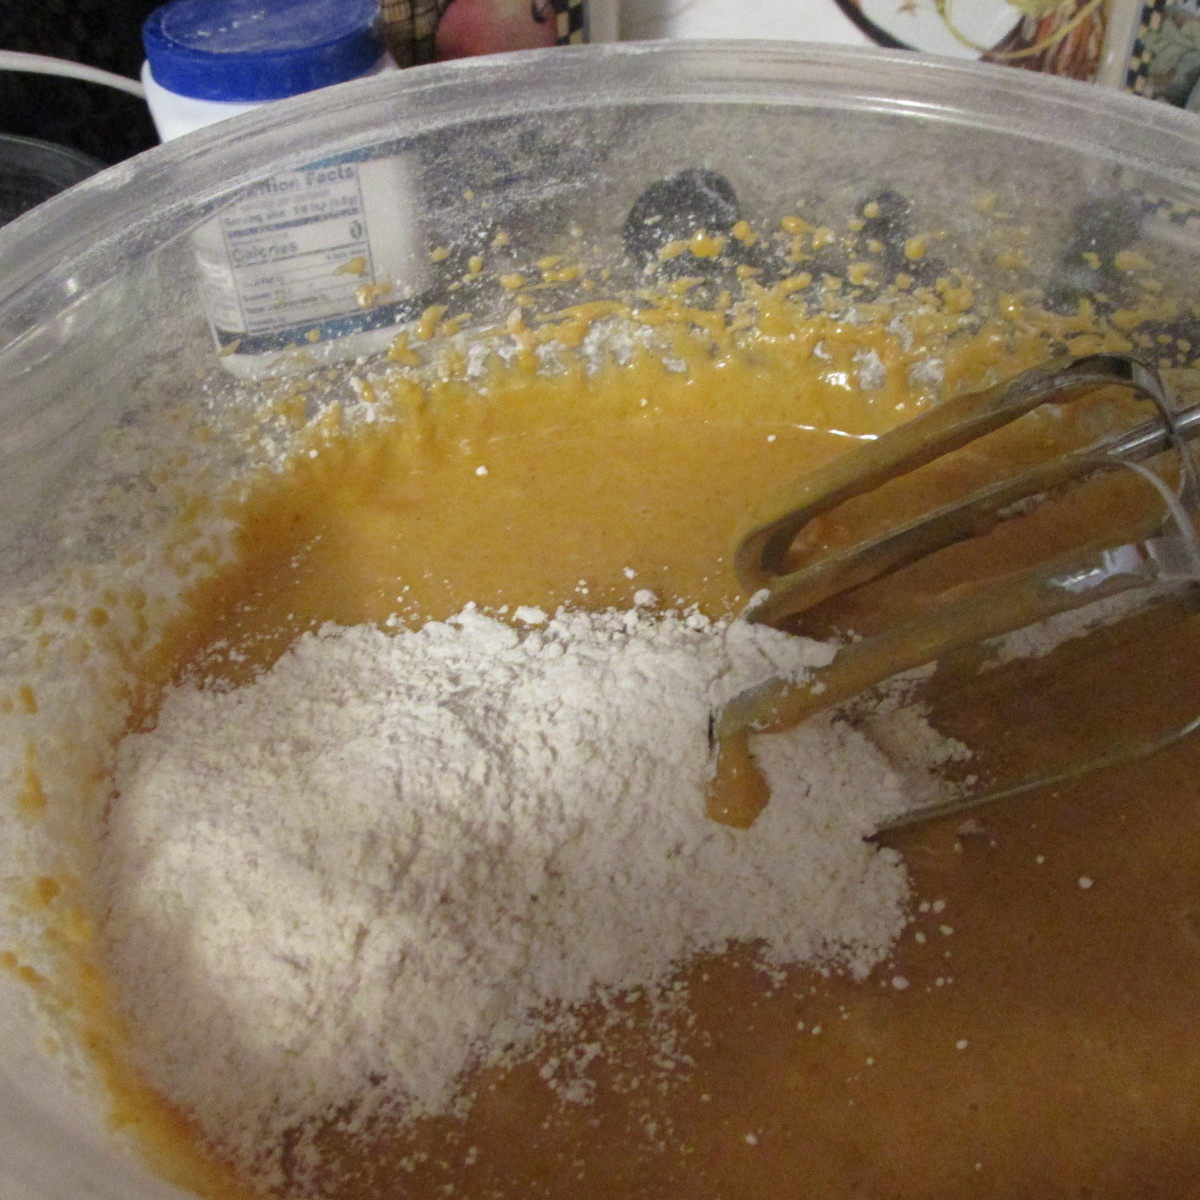 Add the dry ingredients to the wet ingredients.